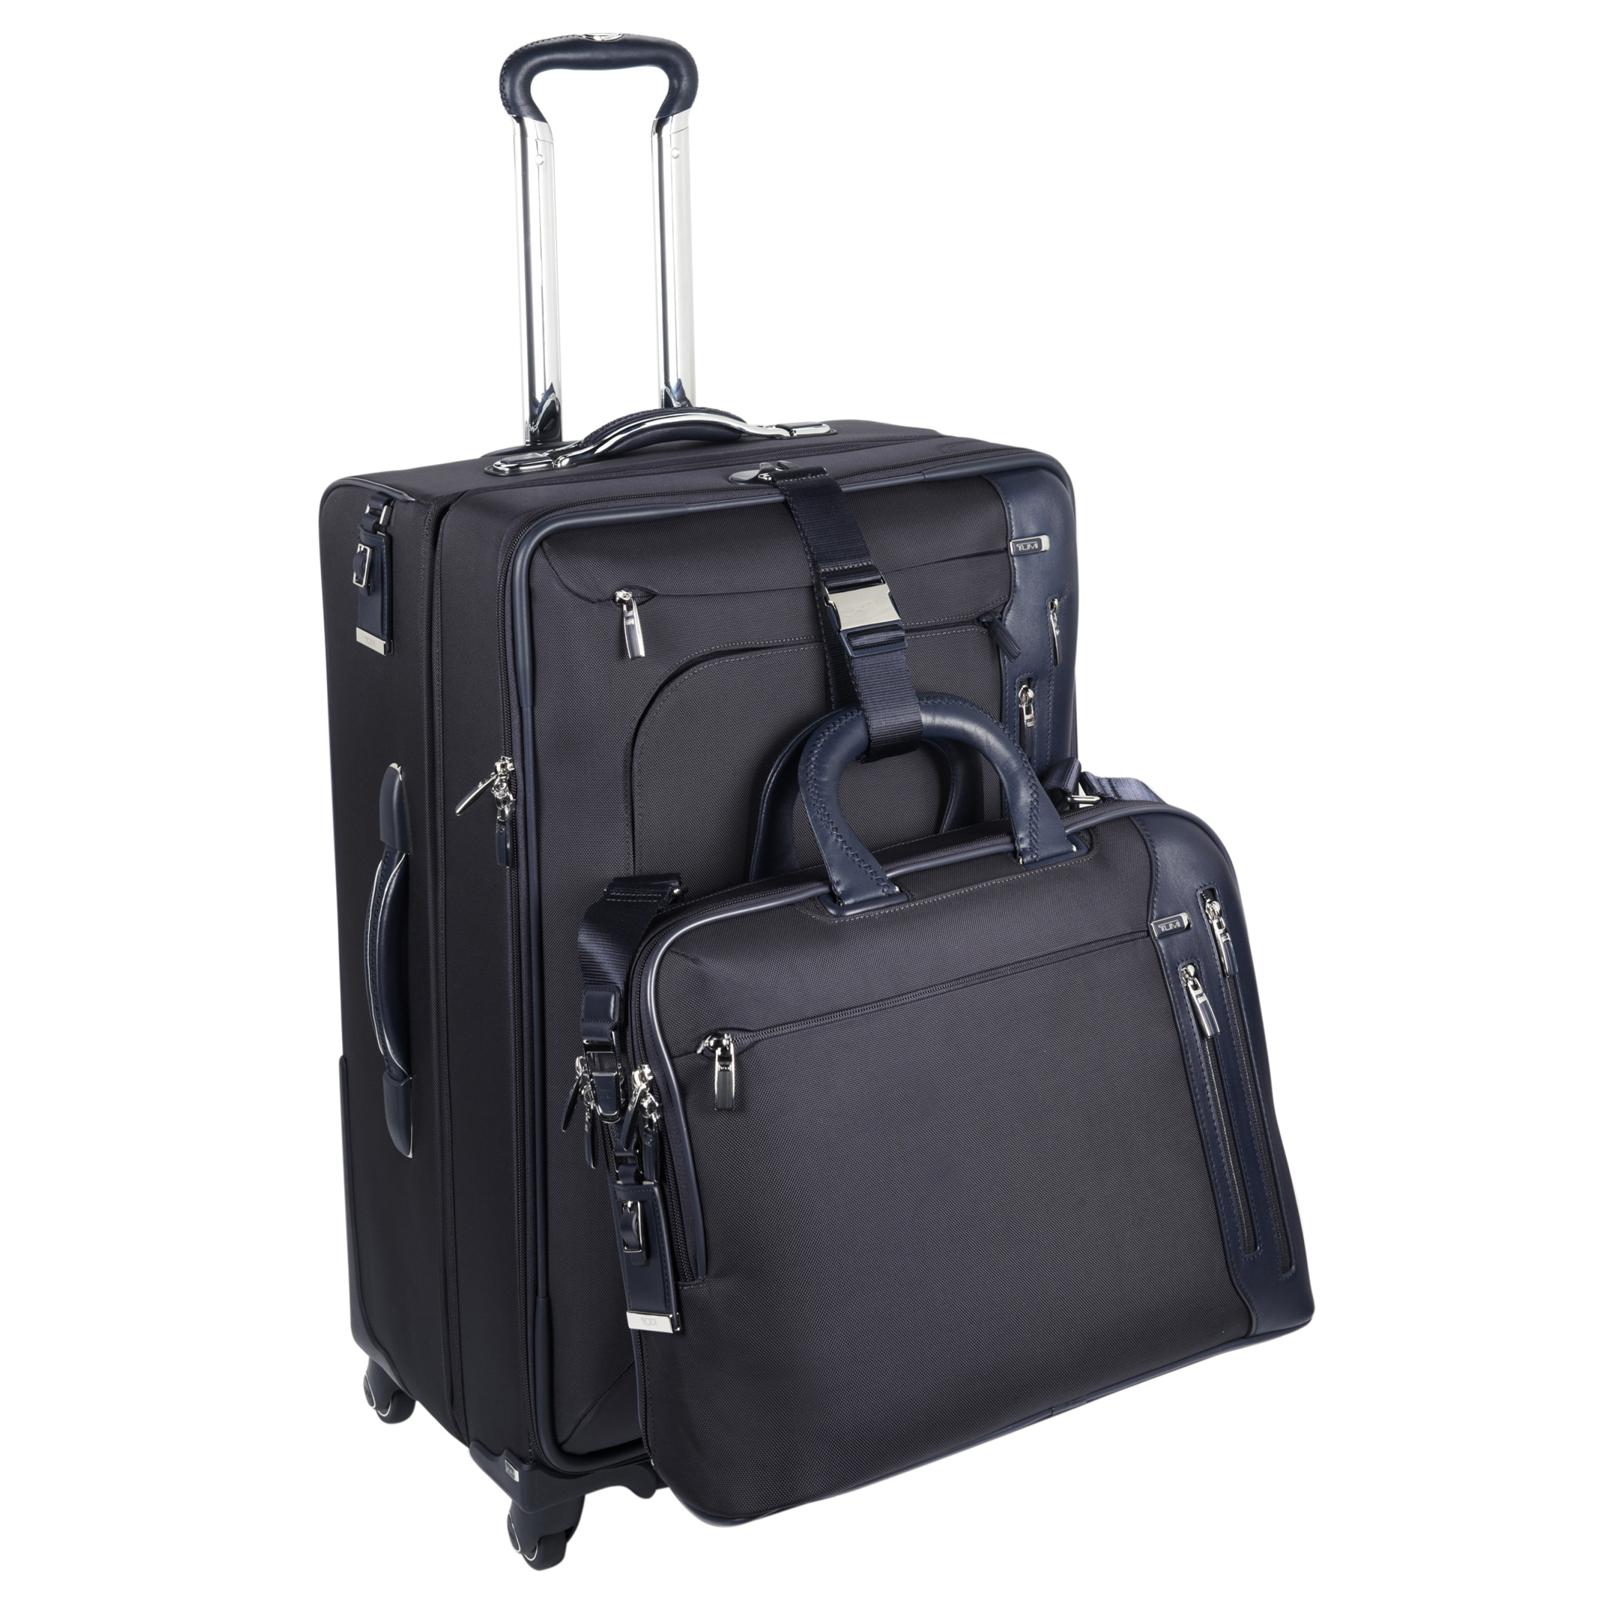 Tumi bags. TUMI - Just In Case Tote - Packable Travel Bag - Foldable ...